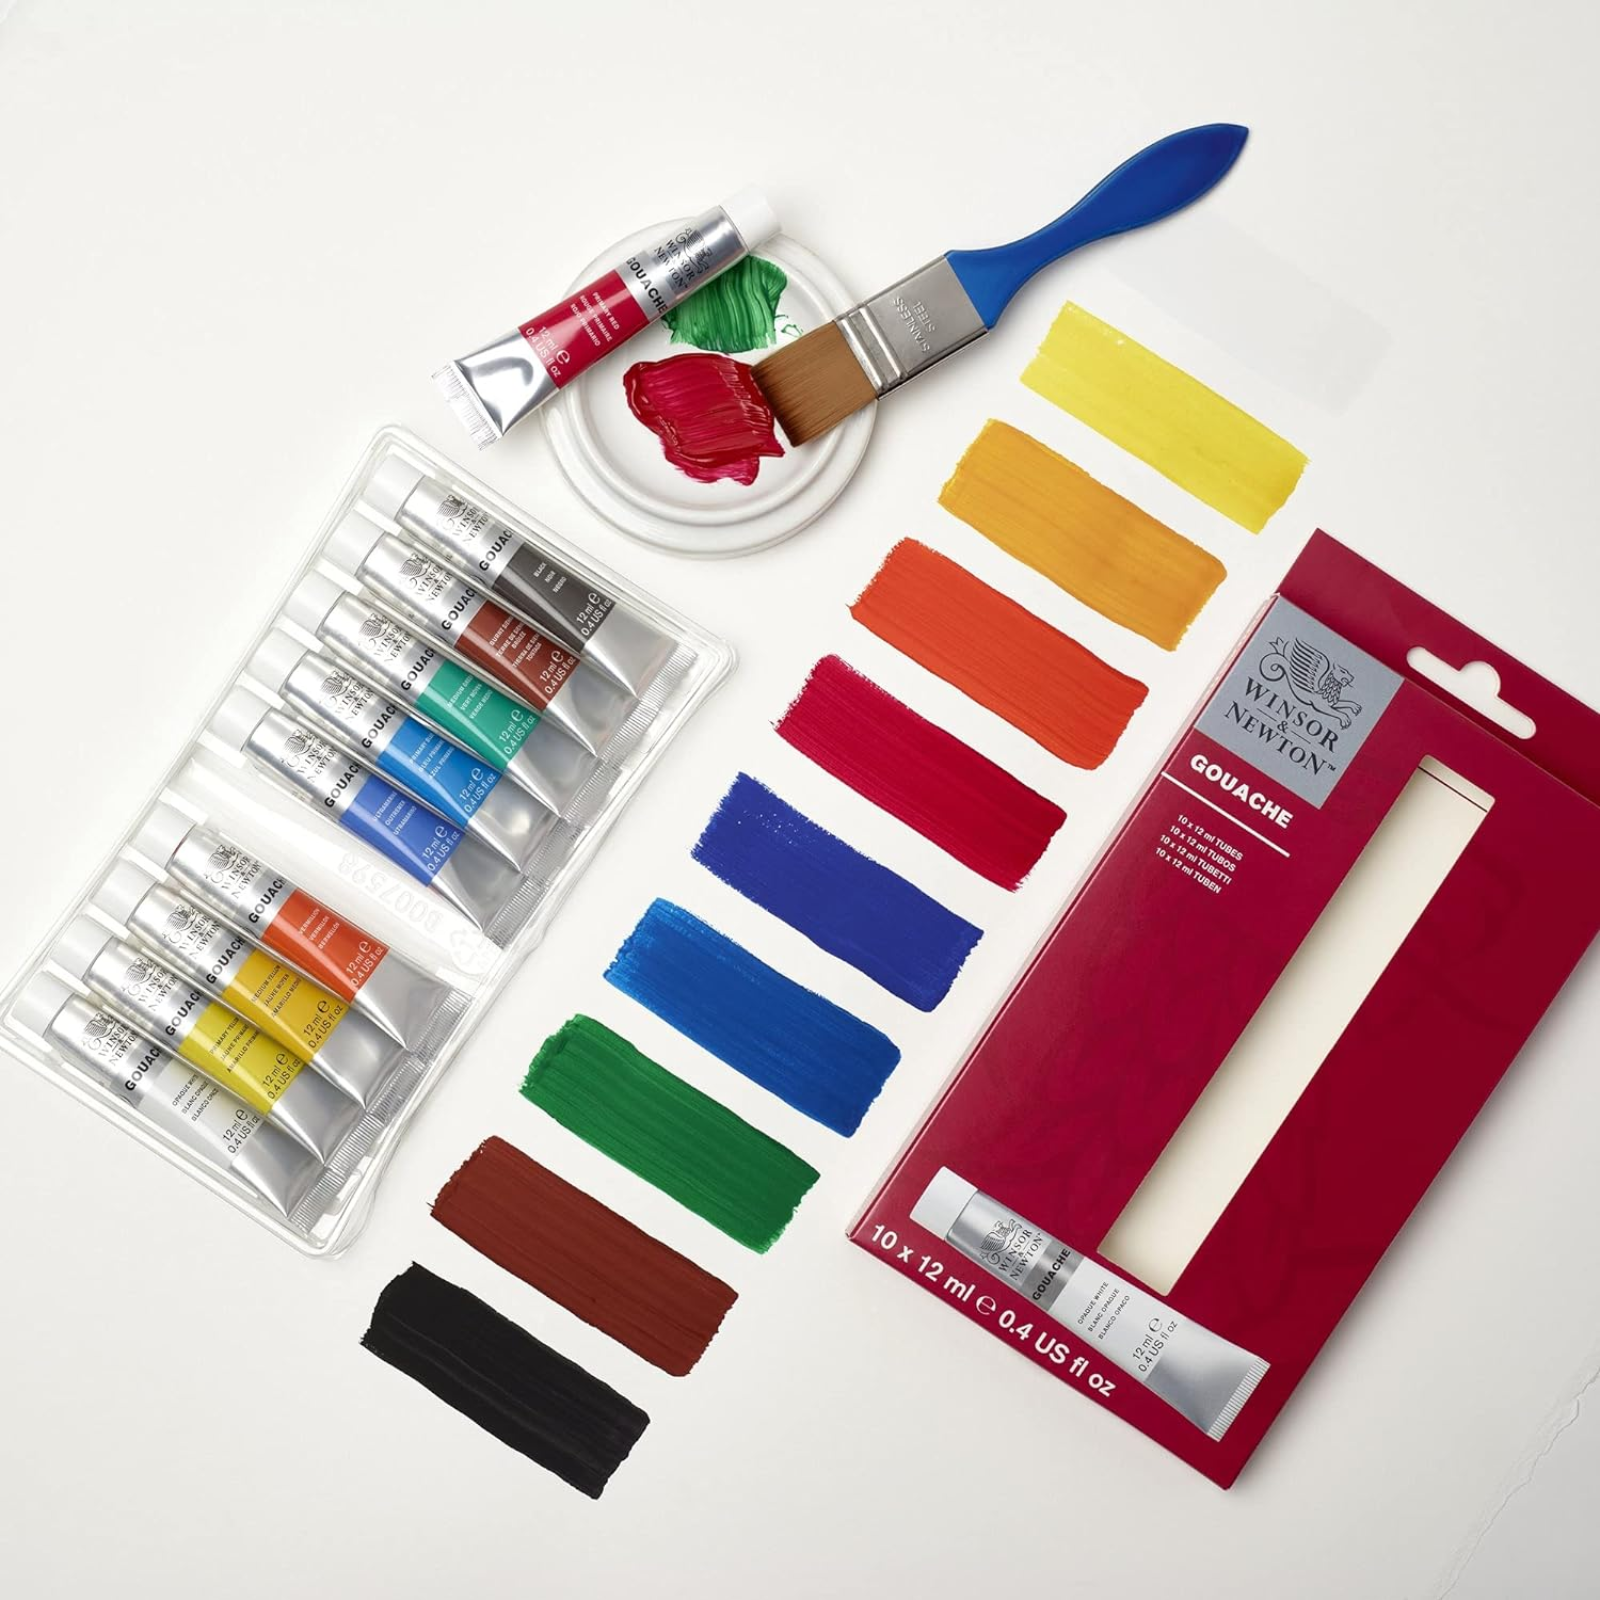 Winsor & Newton Gouache Primary Colour Set, 12ml, 10 Colours - clean, strong and easily intermixed